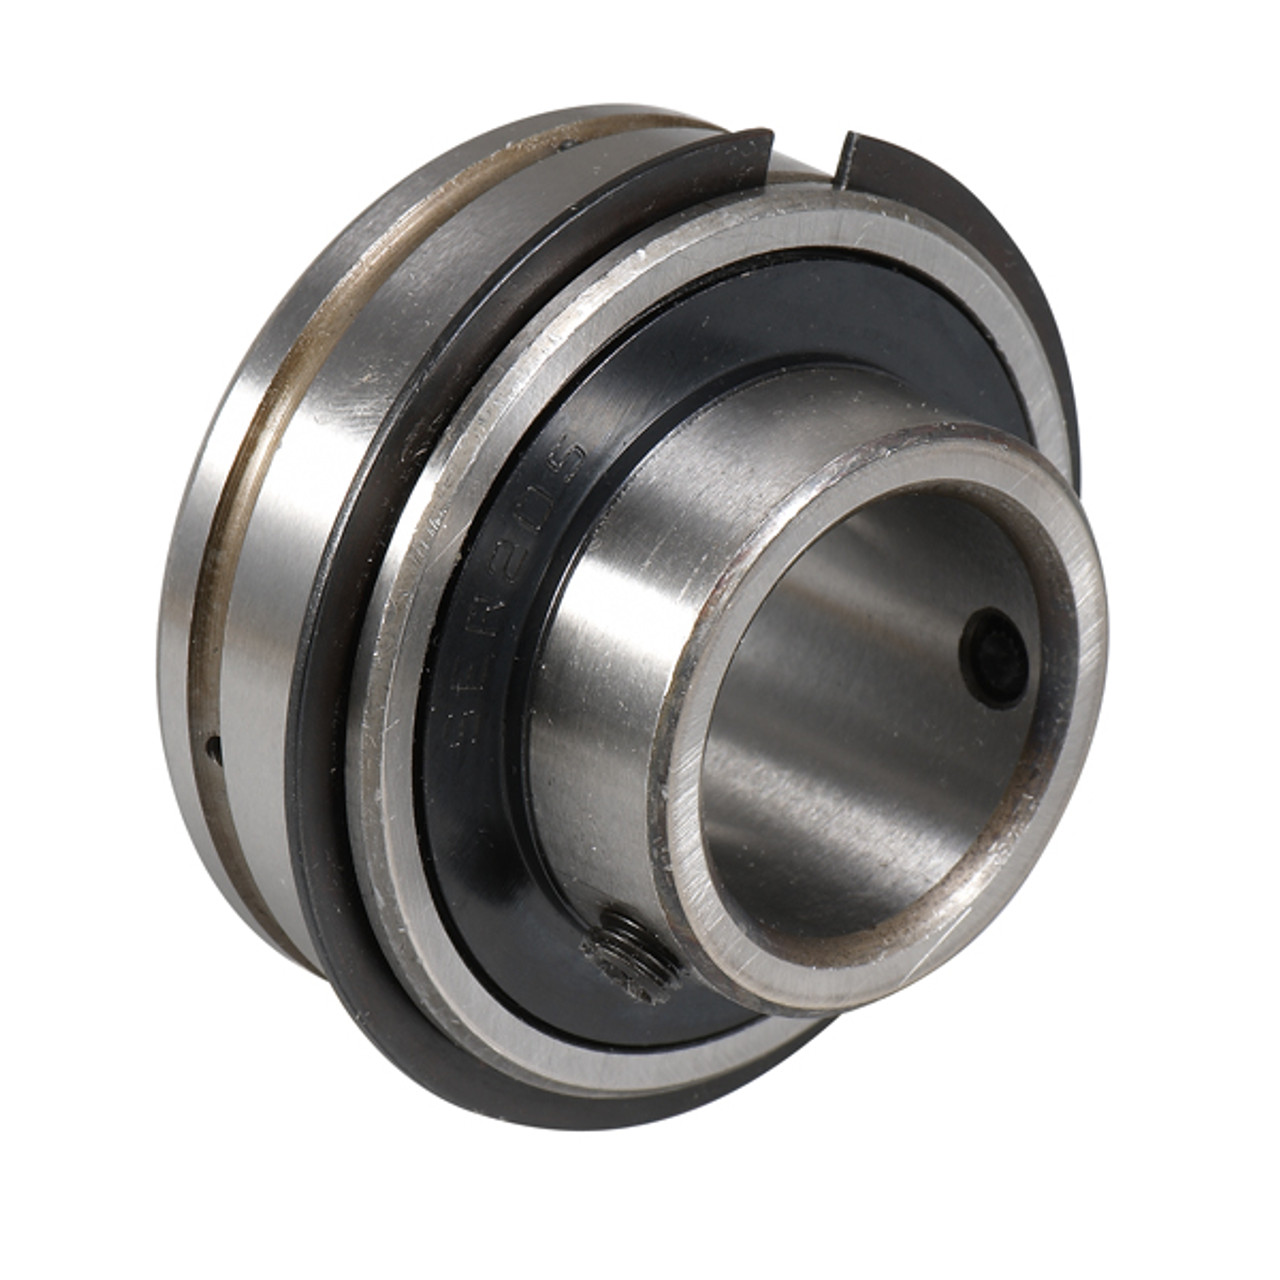 SER205 GENERIC 25mm Normal duty bearing insert with a parallel outer race and grubscrew locking - Metric Thumbnail